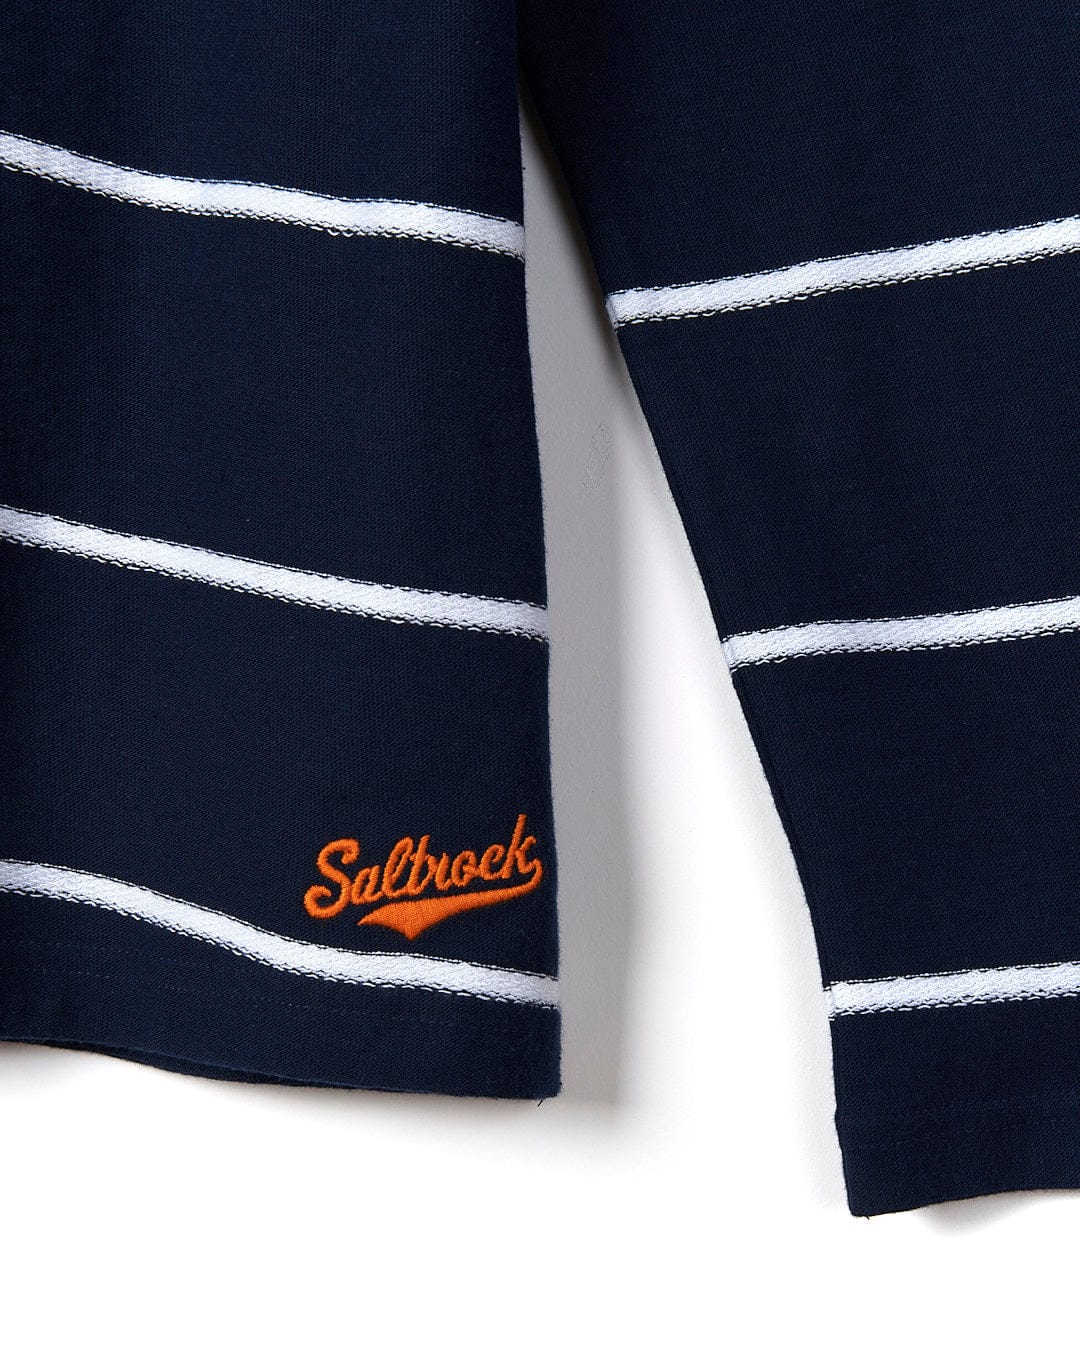 Close-up of a navy blue Saltrock cardigan with white horizontal stripes and an embroidered logo on the left cuff, creating a nautical look.